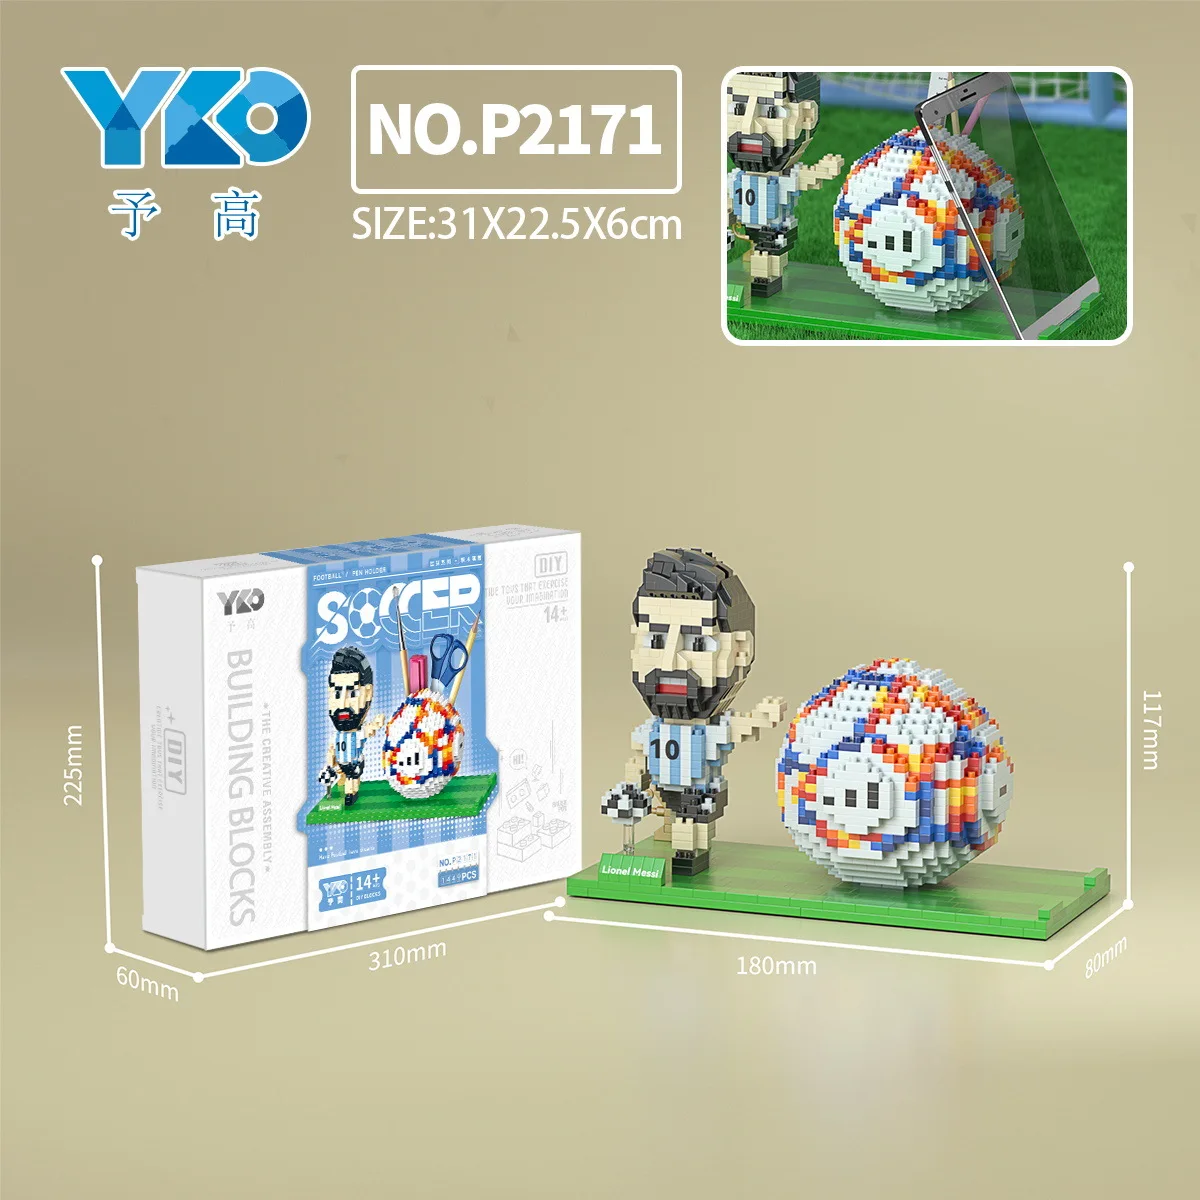 YKO P2171 2022 World Cup Pen Holder Lionel Messi Cell Phone Bracket Dual